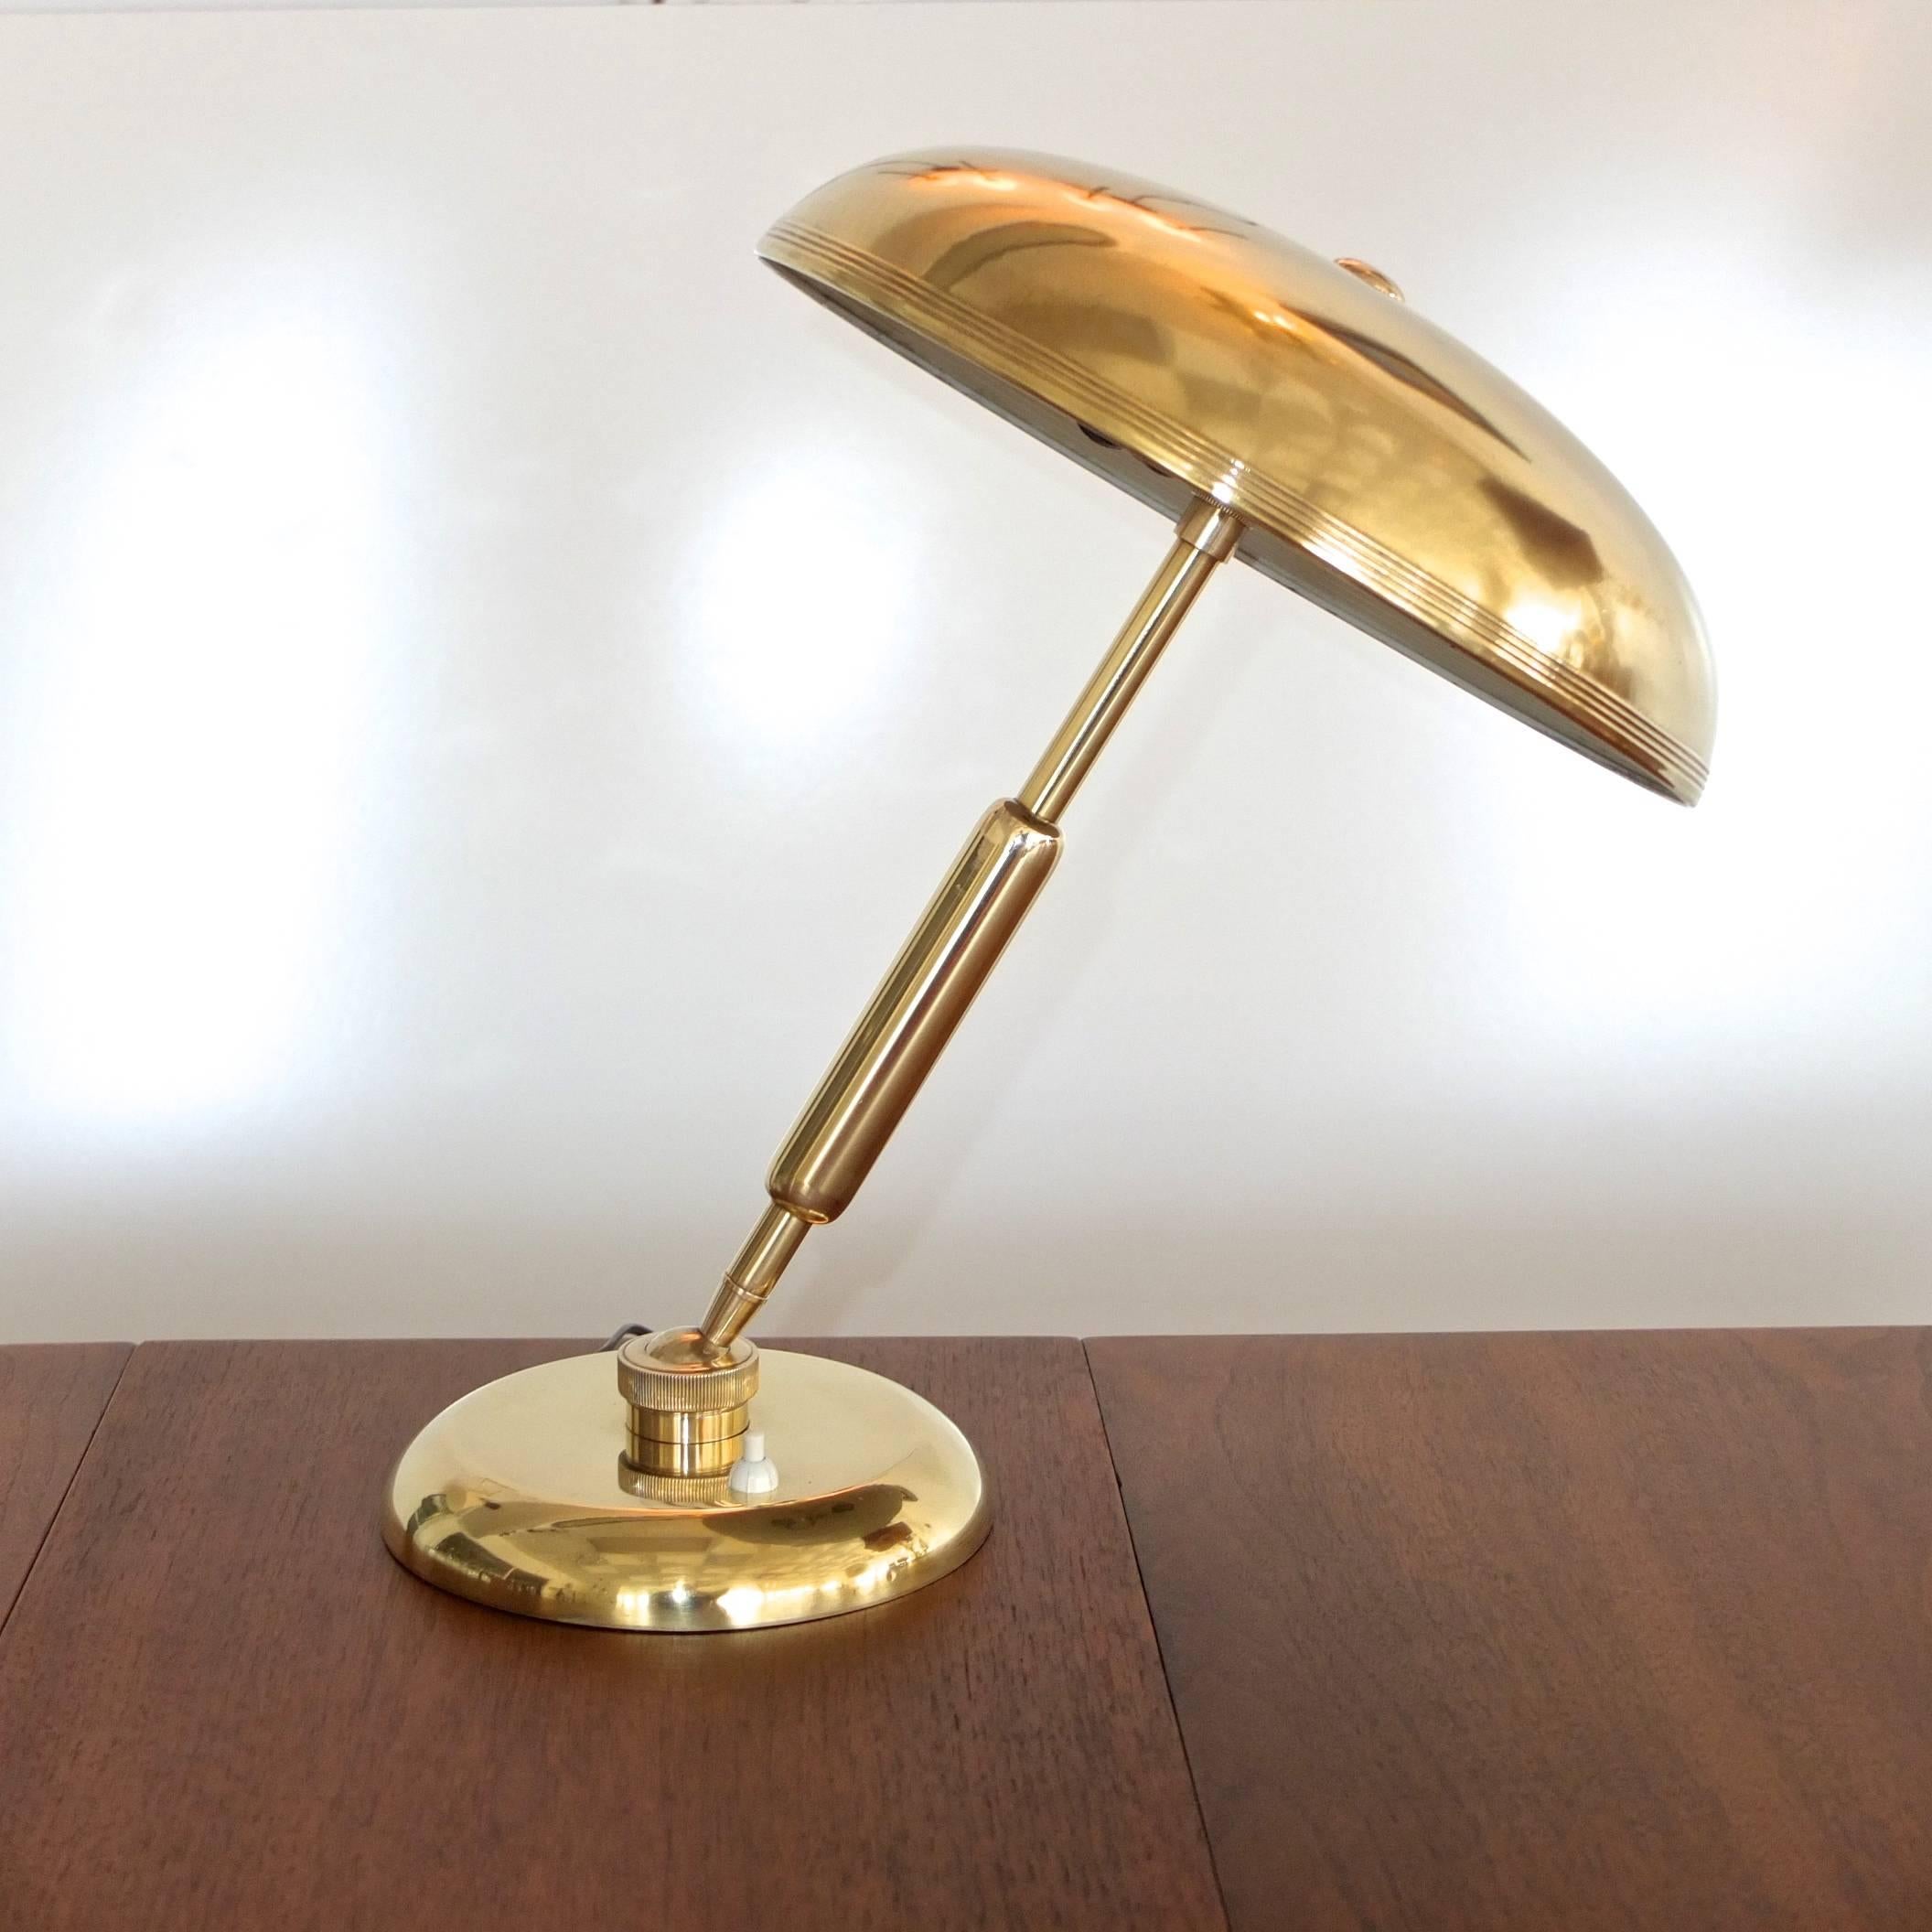 Gorgeous high quality table or desk lamp in solid brass from Italy, 1940s-1950s with a weighted round brass base and an enormous ball joint from which the sturdy stem can pivot ~140 x 360 degrees. The round brass domed mushroom head is also attached